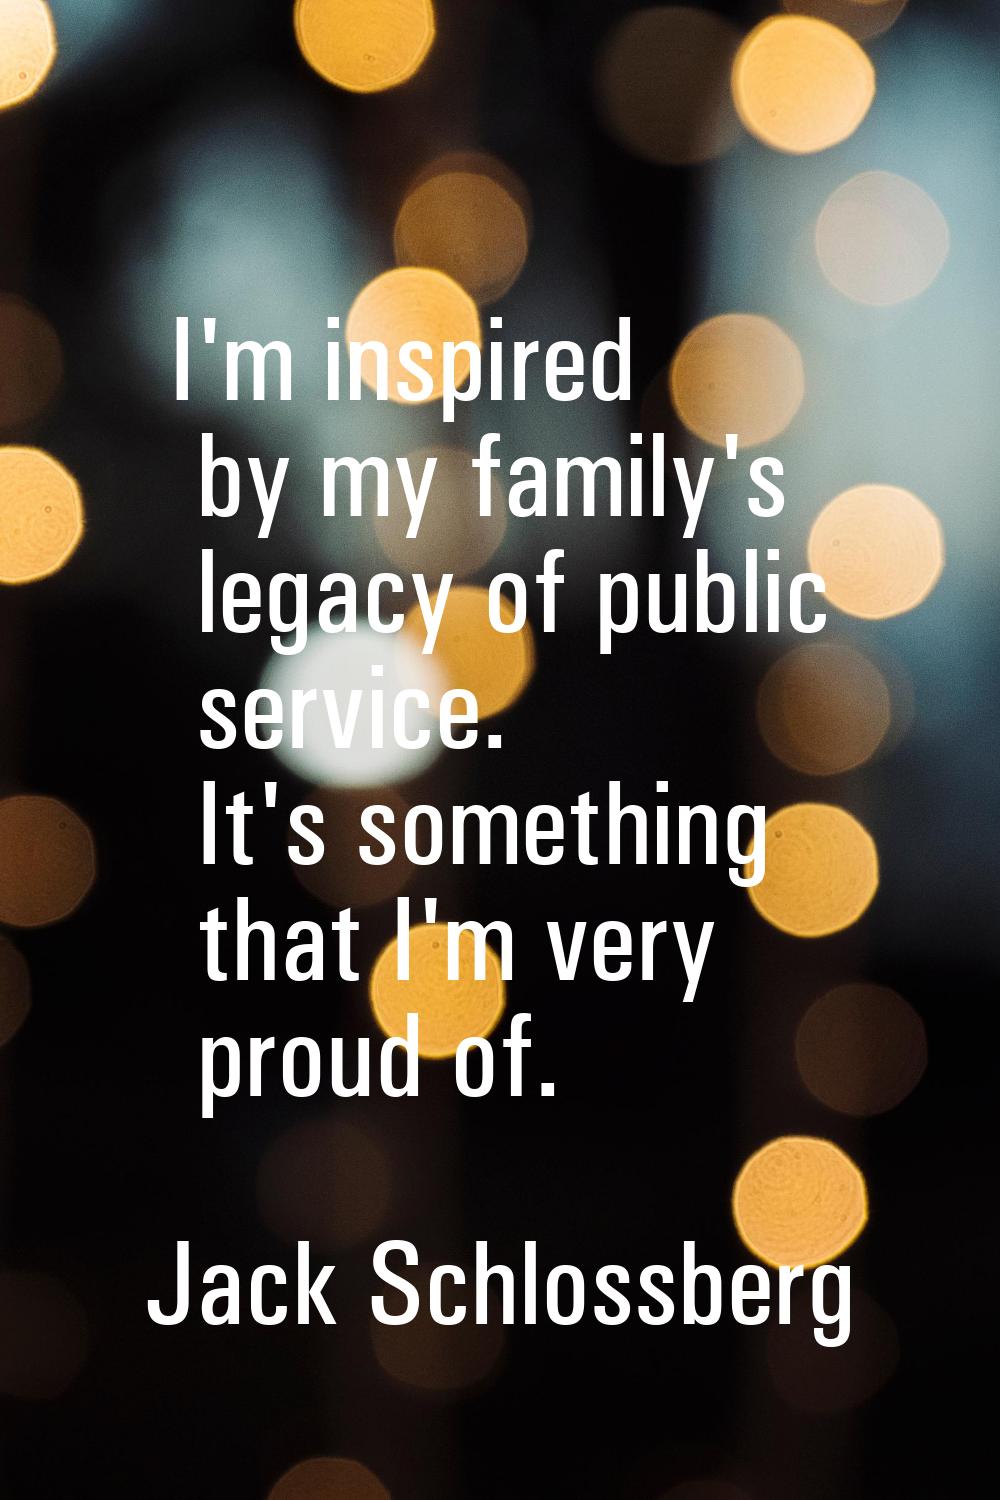 I'm inspired by my family's legacy of public service. It's something that I'm very proud of.